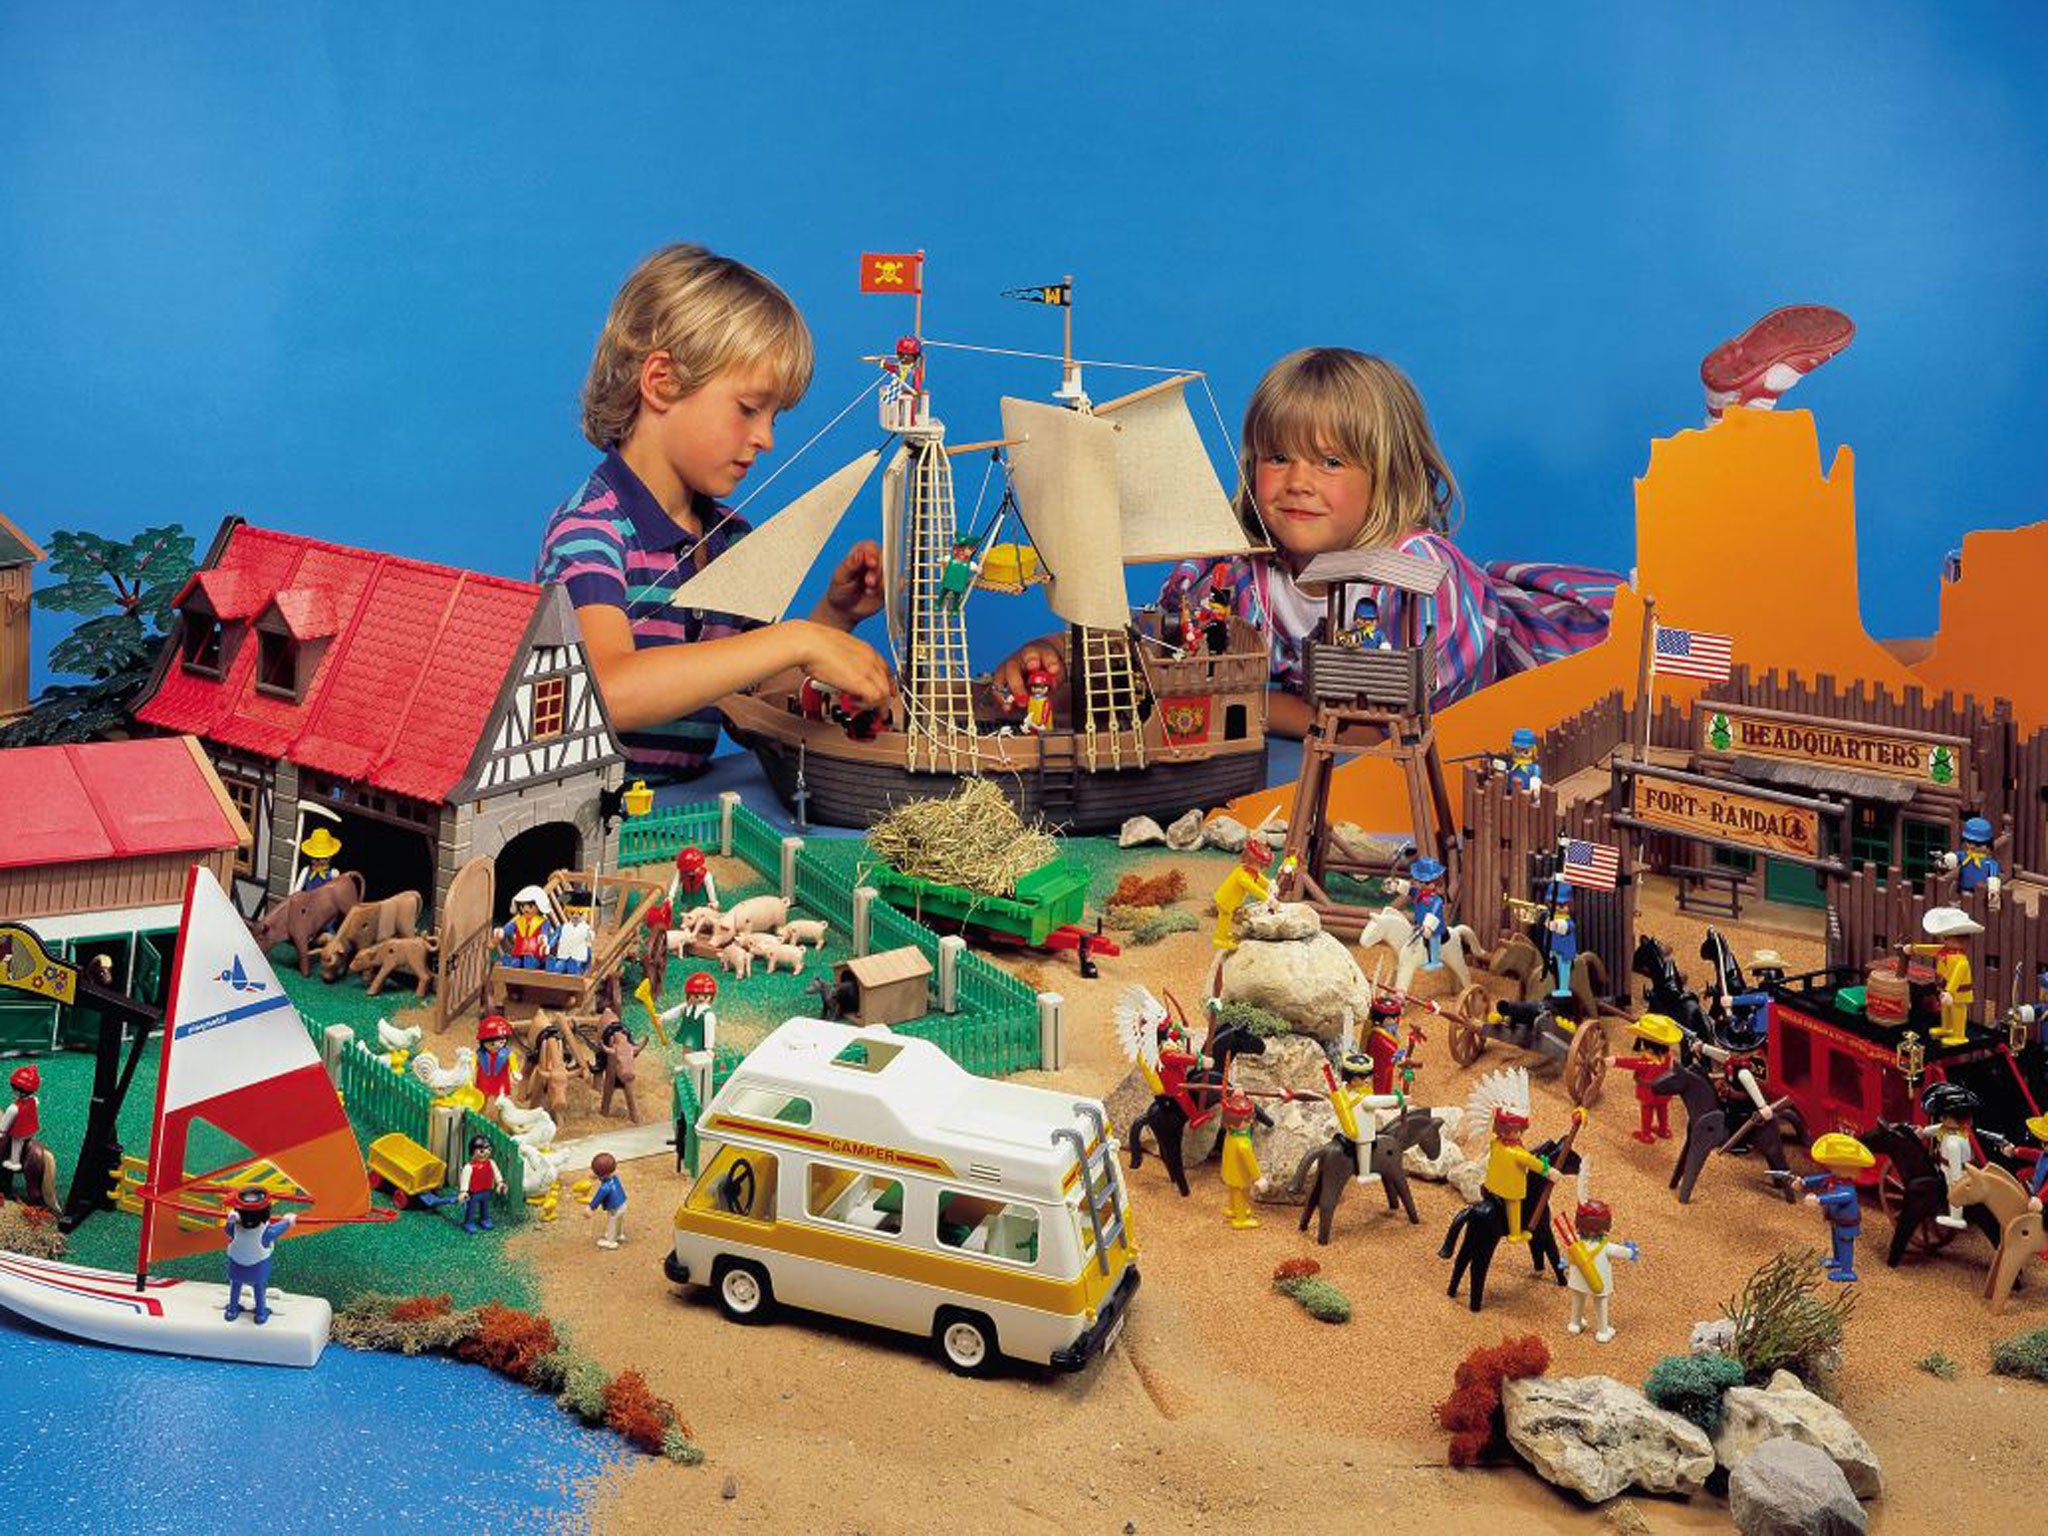 Play for today: Playmobil